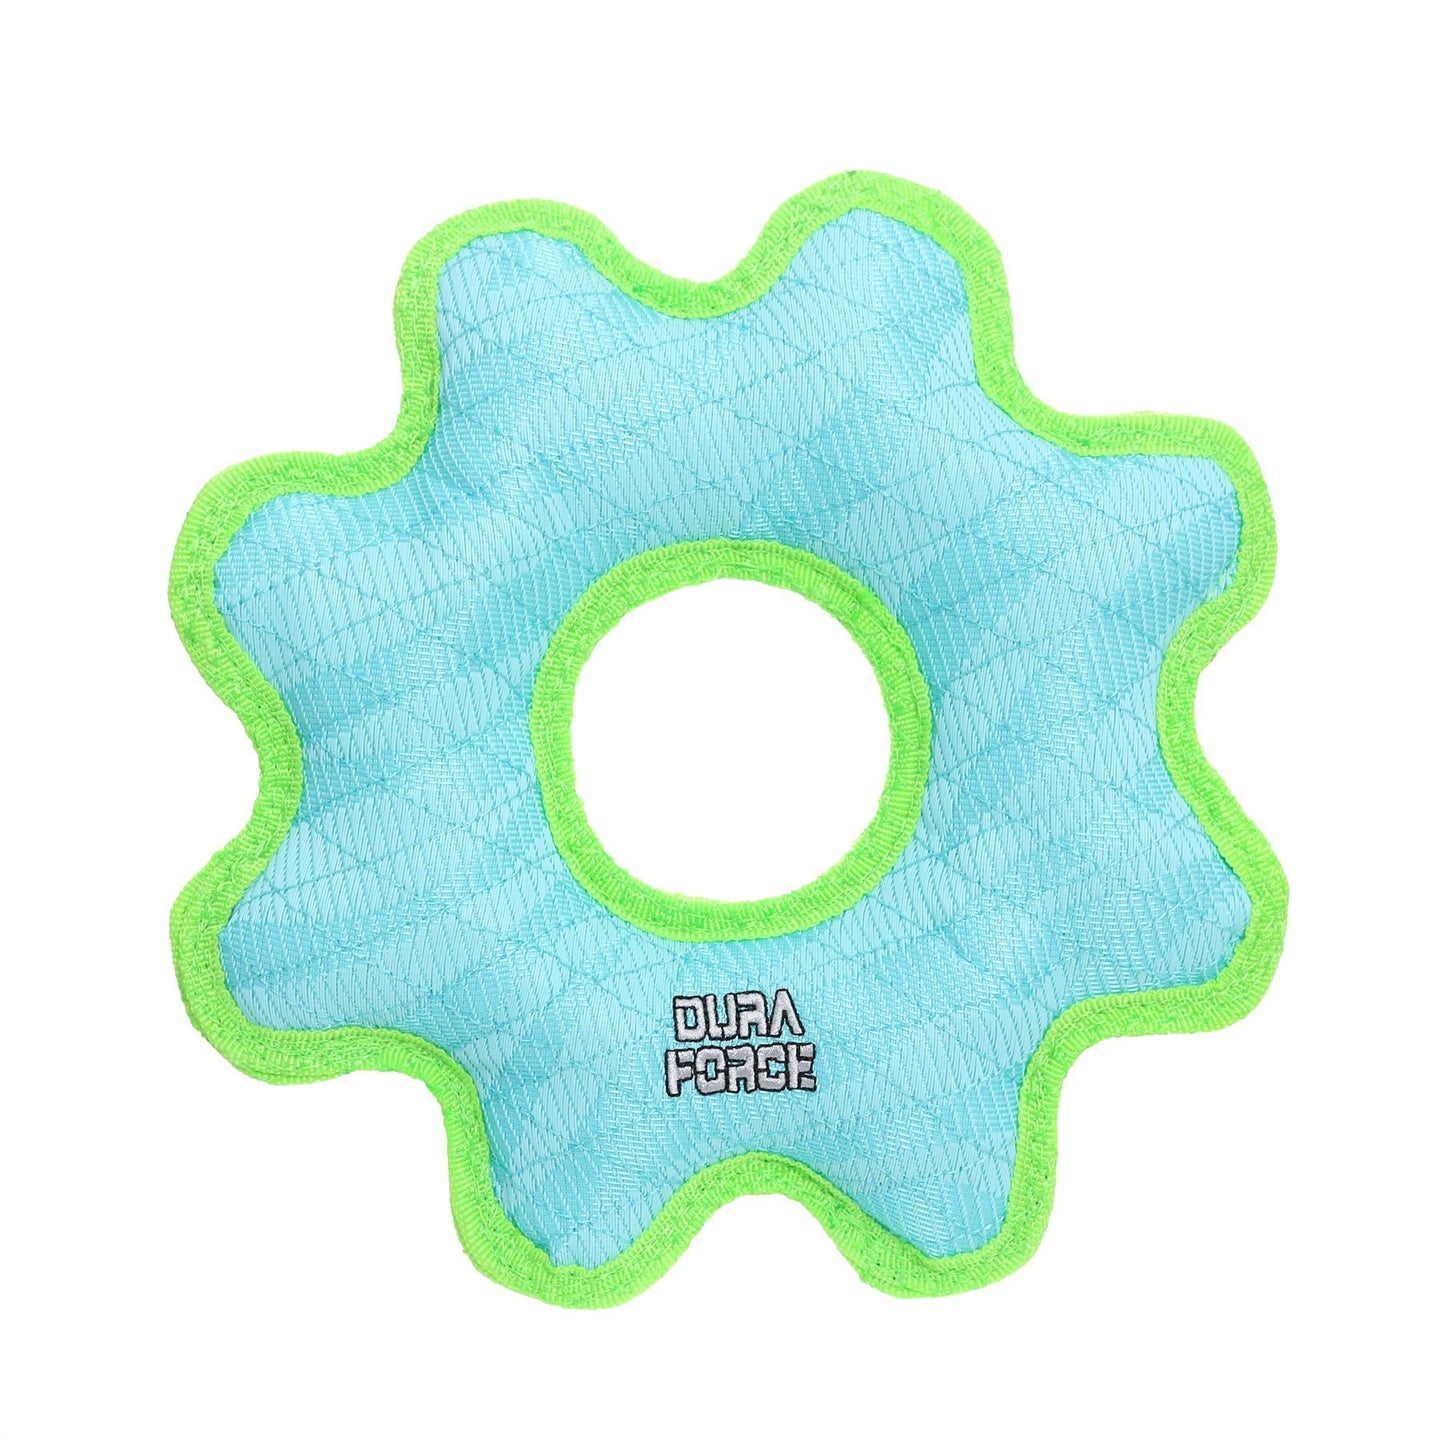 DuraForce Med Gear Ring Tiger - Blue and Green - Bulletproof Pet Products Inc